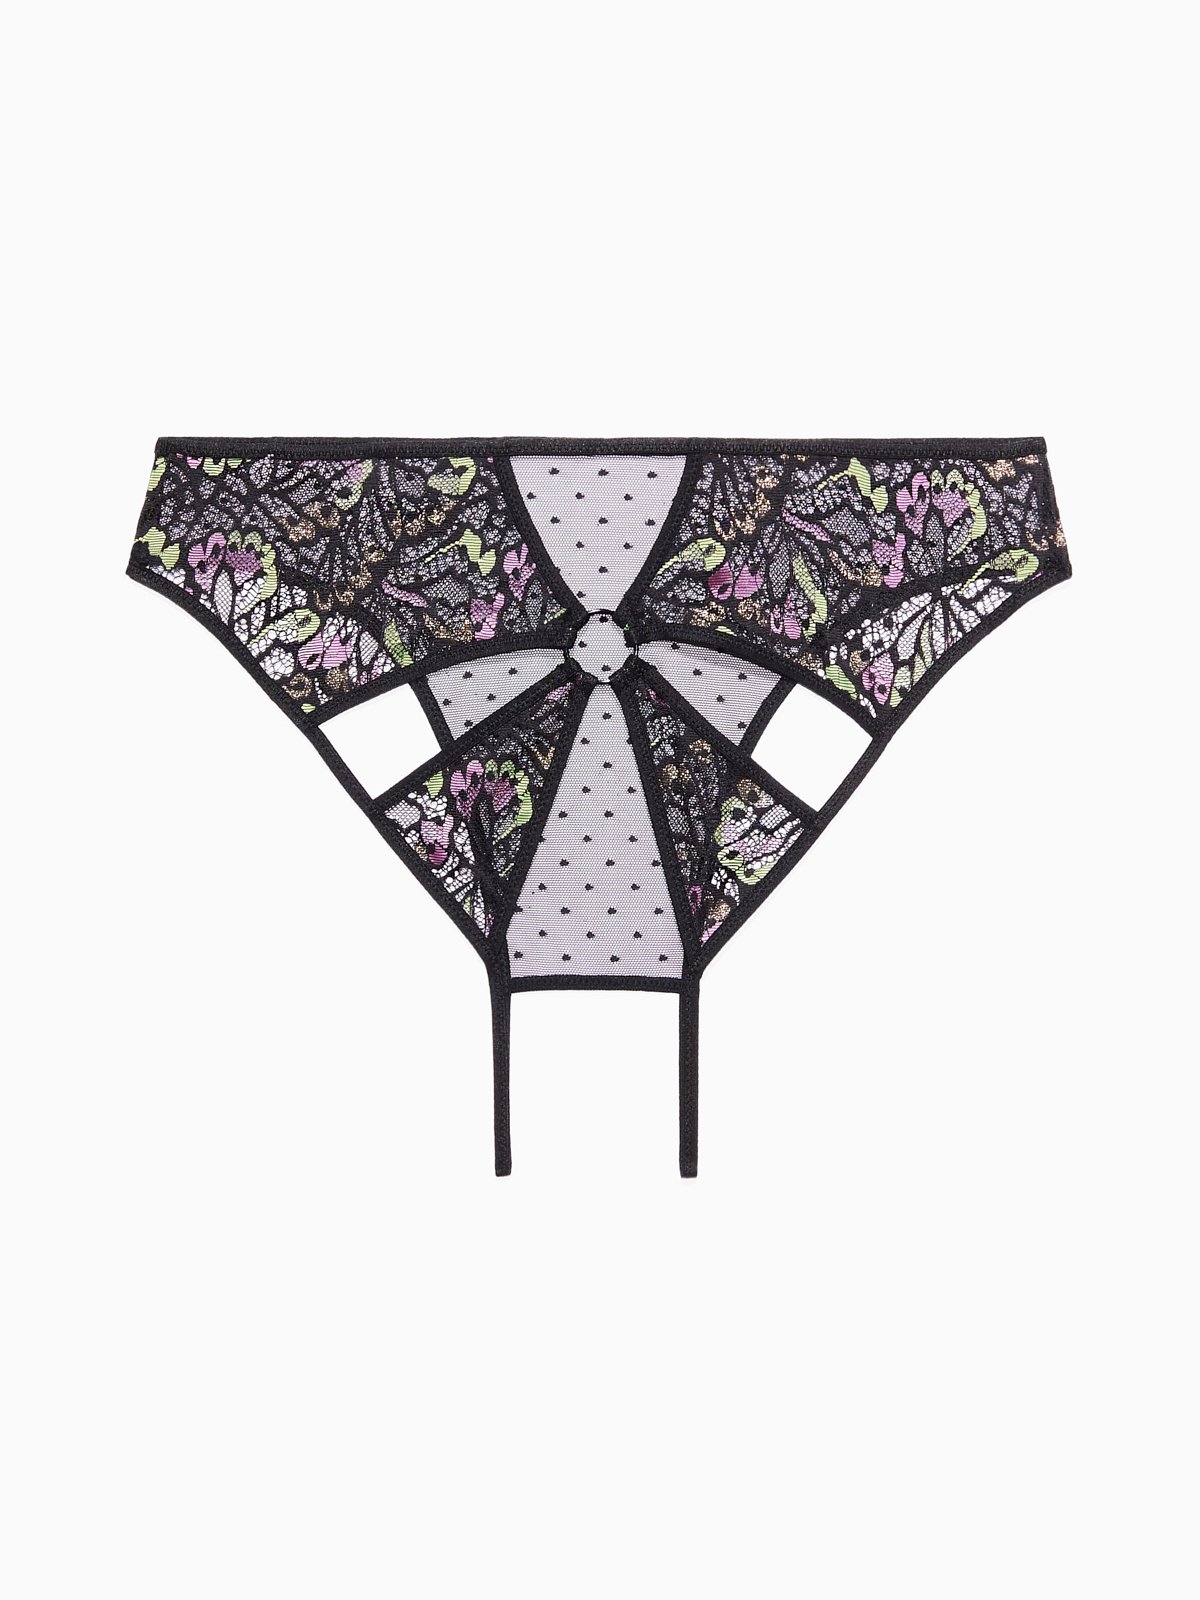 Butterfly Wings Lace & Mesh Crotchless Knickers in Black & Multi